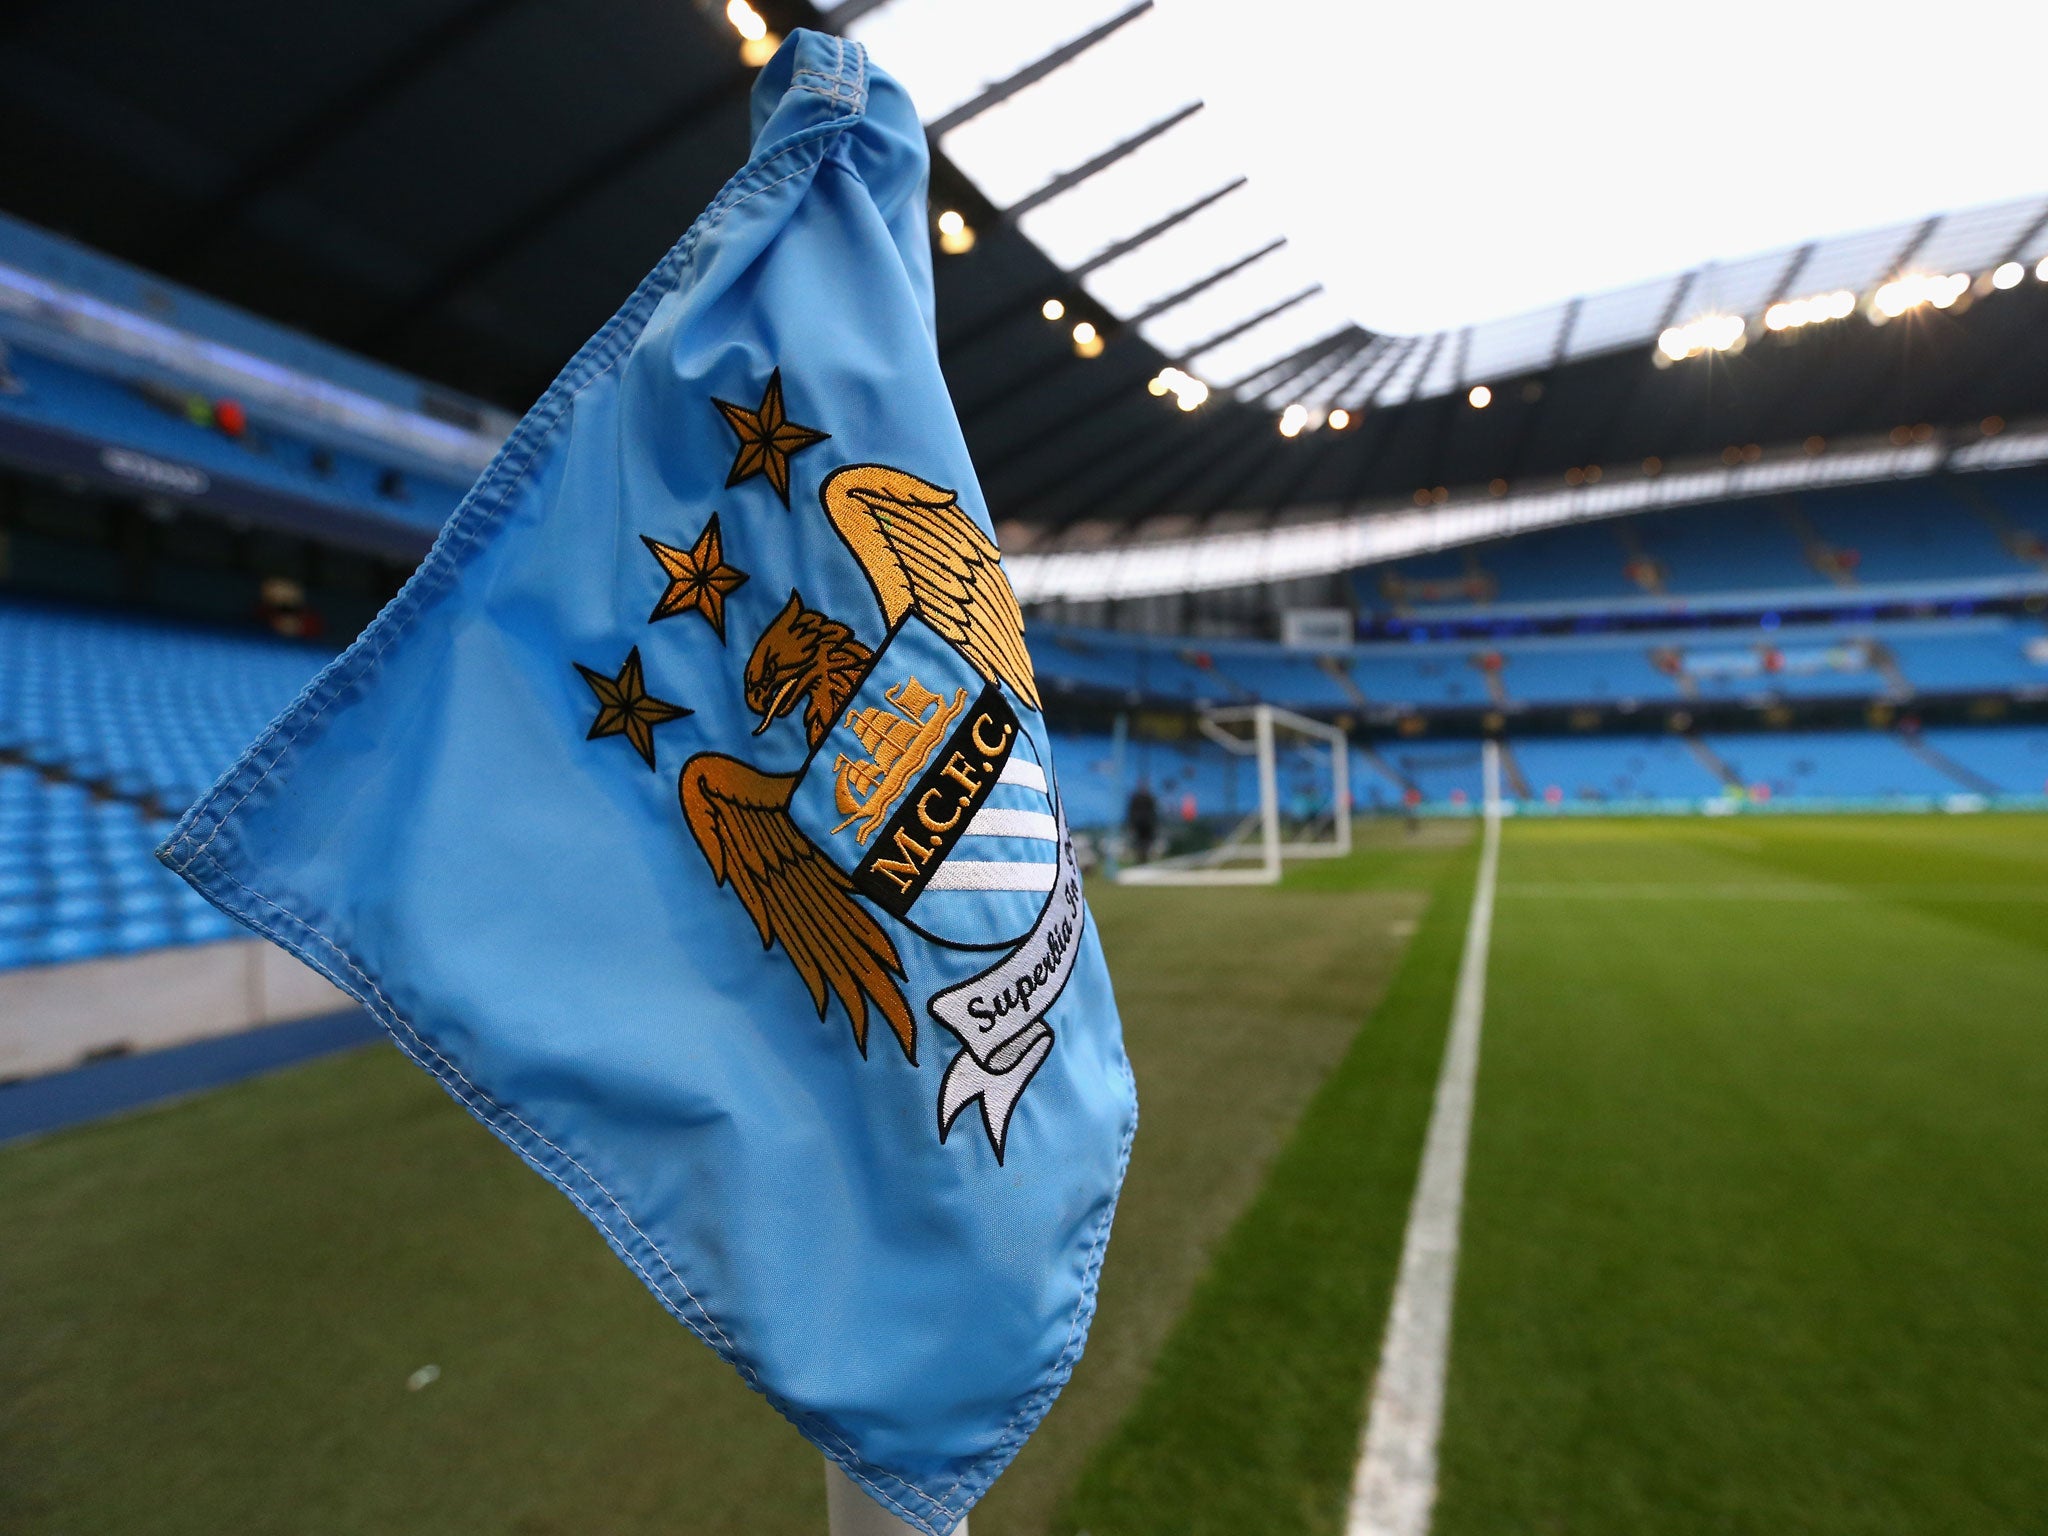 Manchester City deny breaching UEFA's FFP rules